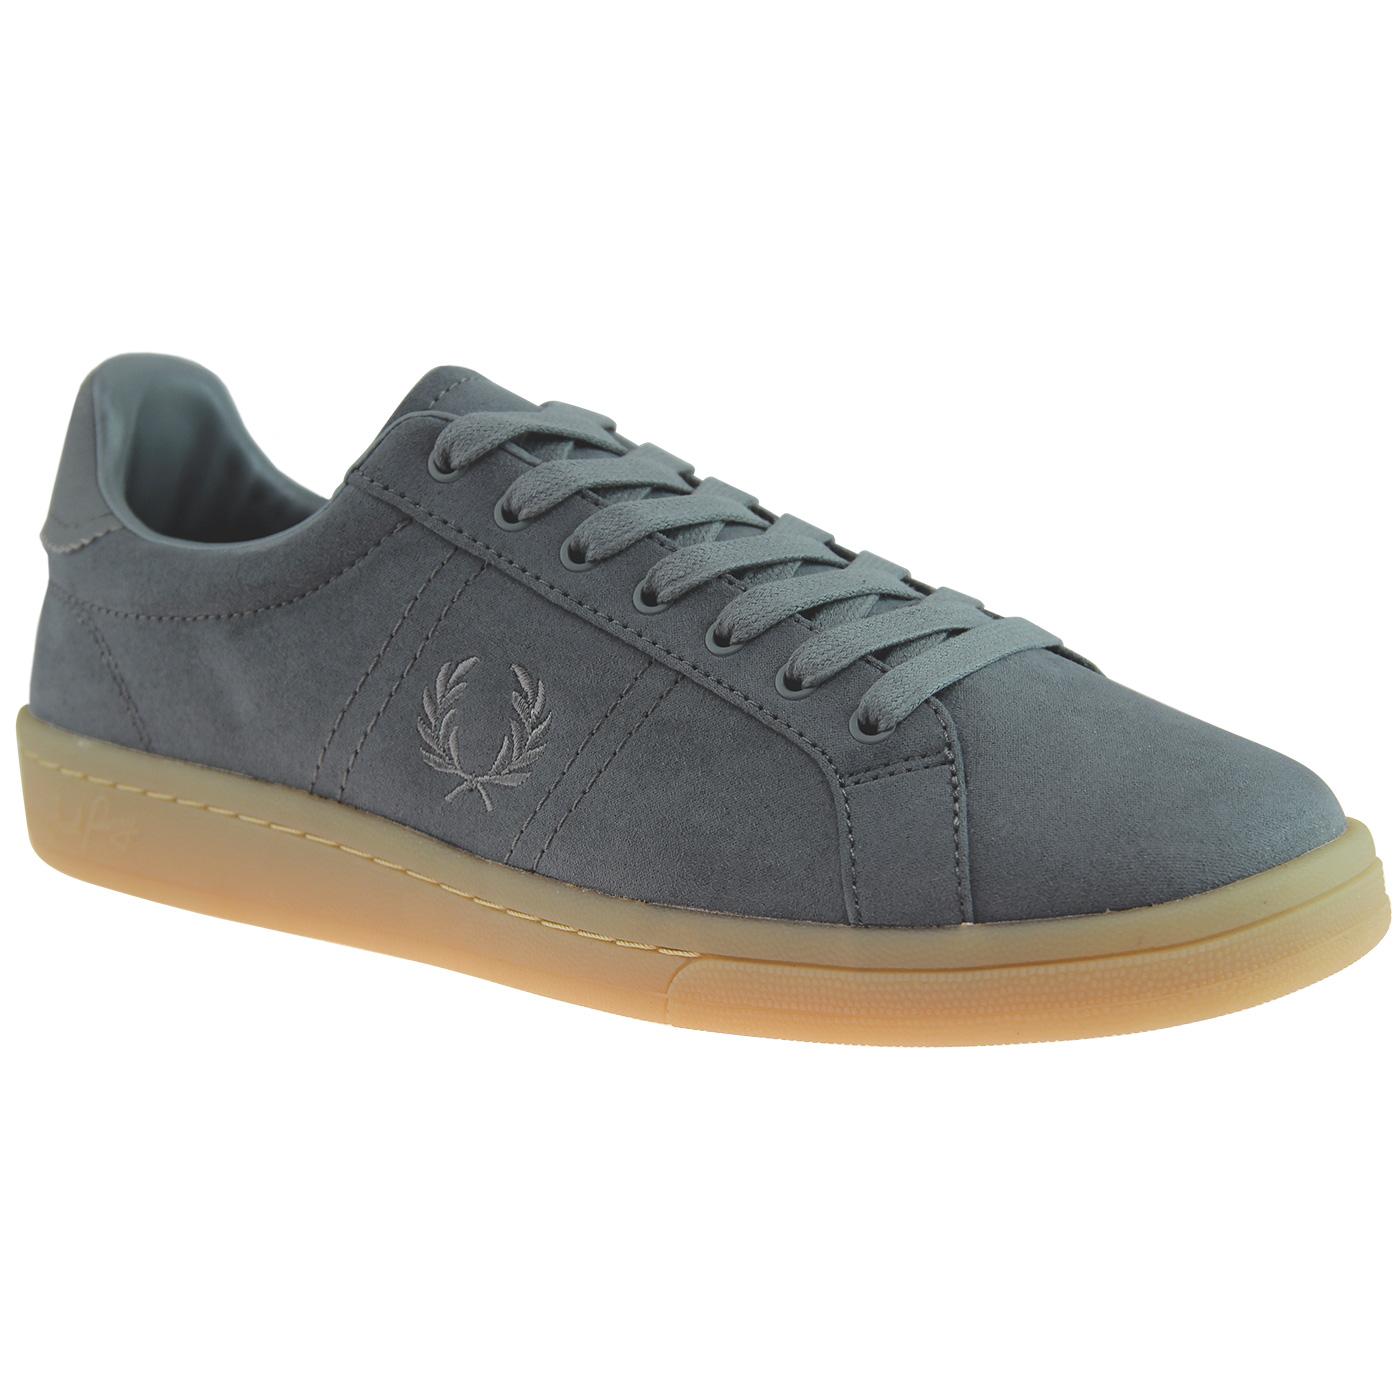 FRED PERRY B721 Microfibre Tennis Trainers in Airforce Blue